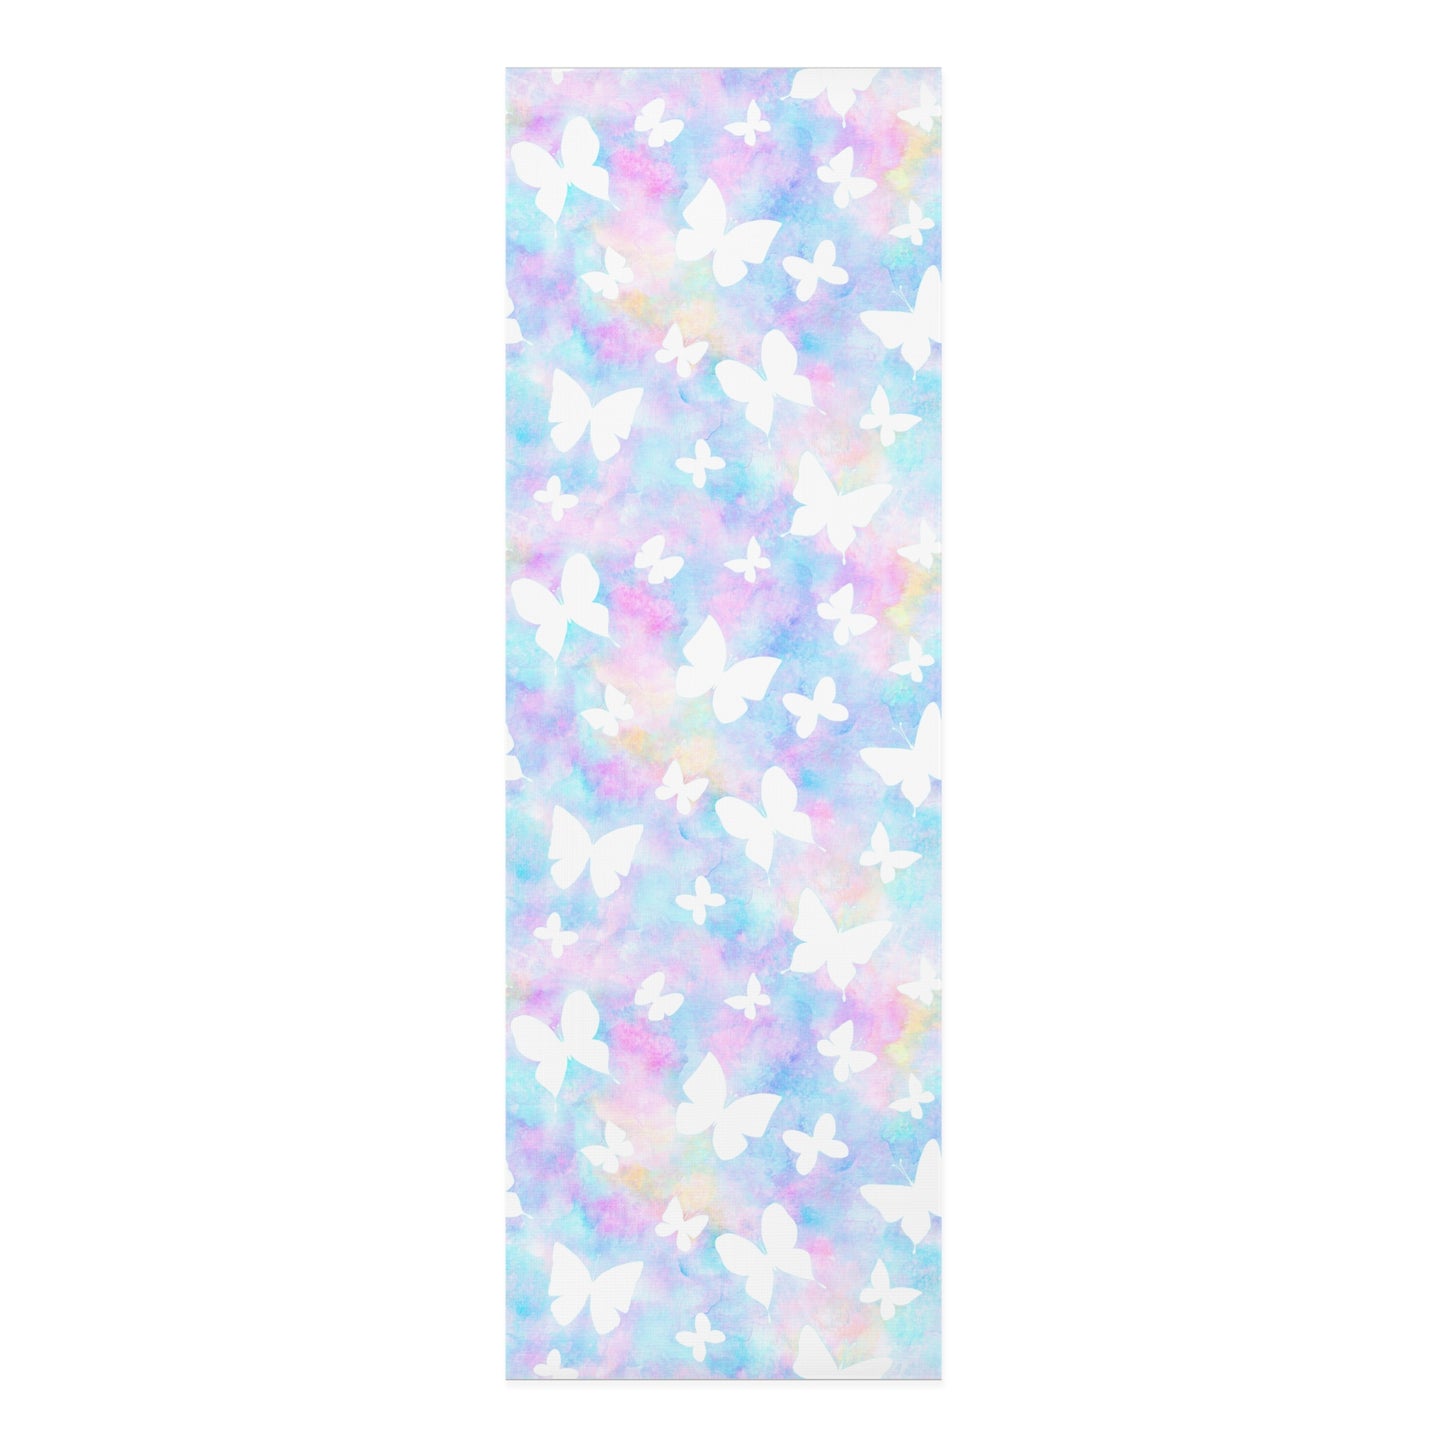 Pastel Butterflies Foam Yoga Mat, Foam Material, Lightweight, and Can Cushion You From Impacts